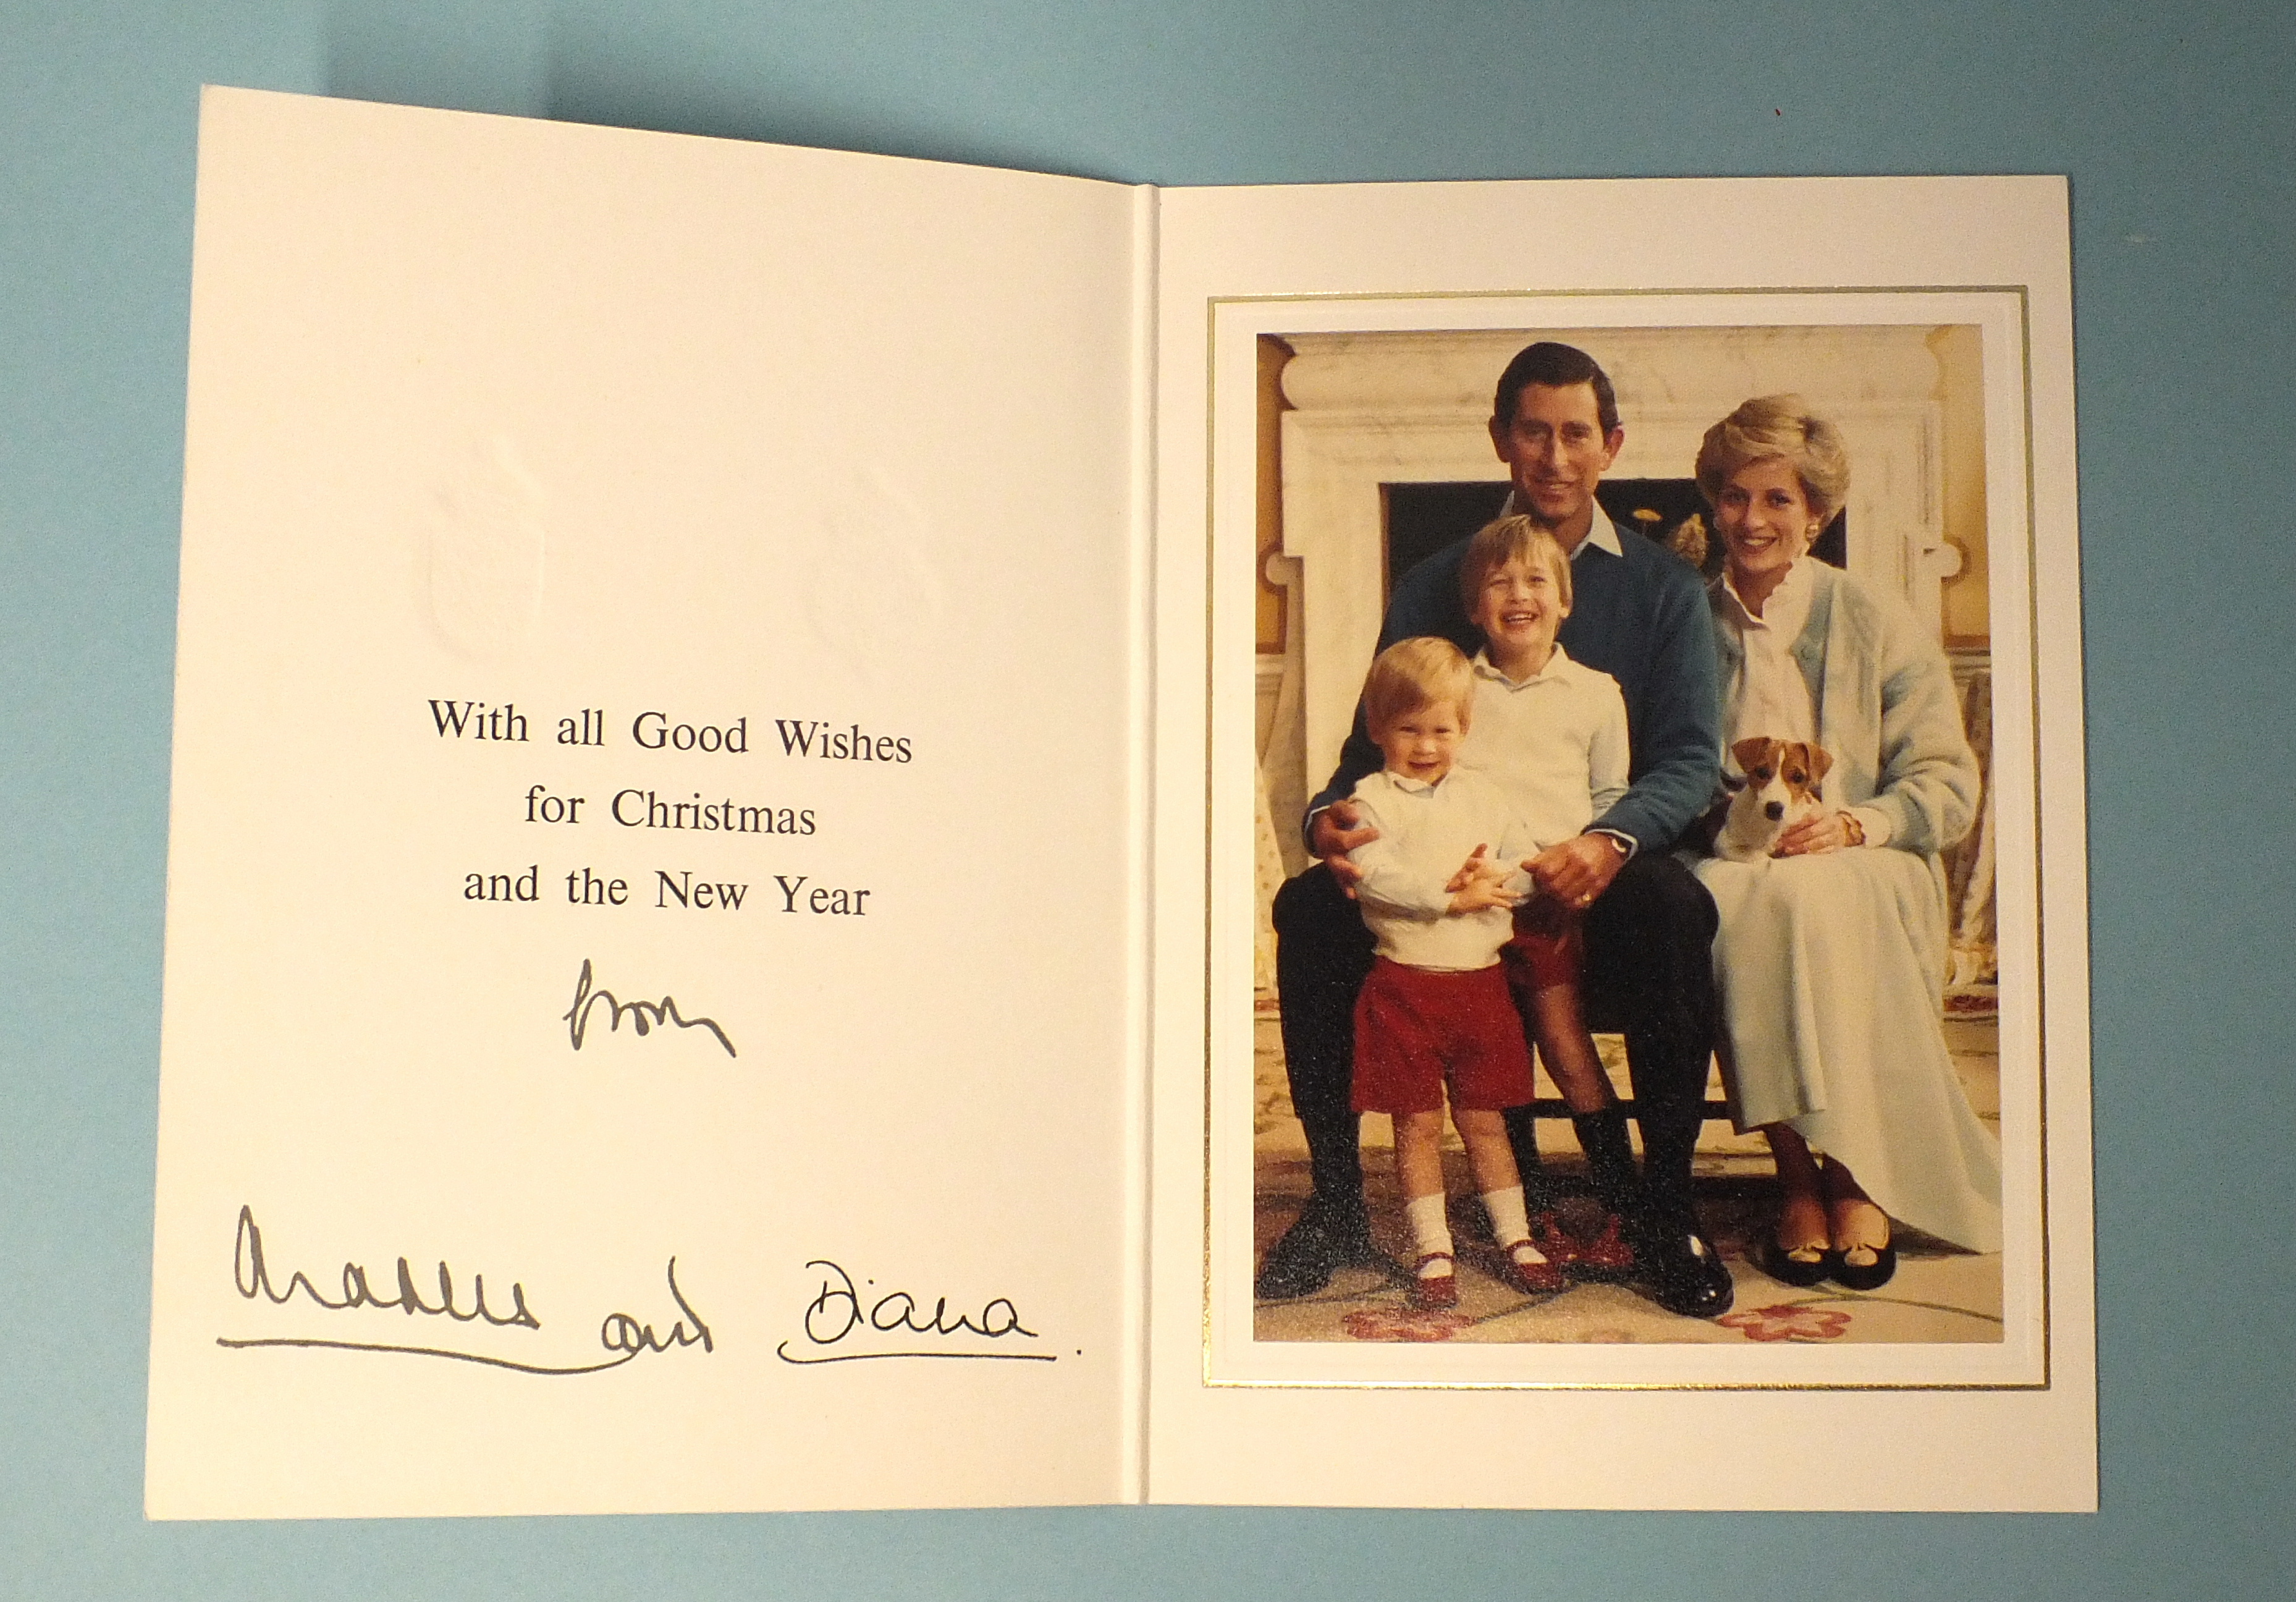 HRH Charles, Prince of Wales and HRH Diana, Princess of Wales, Christmas card 1986, signed from